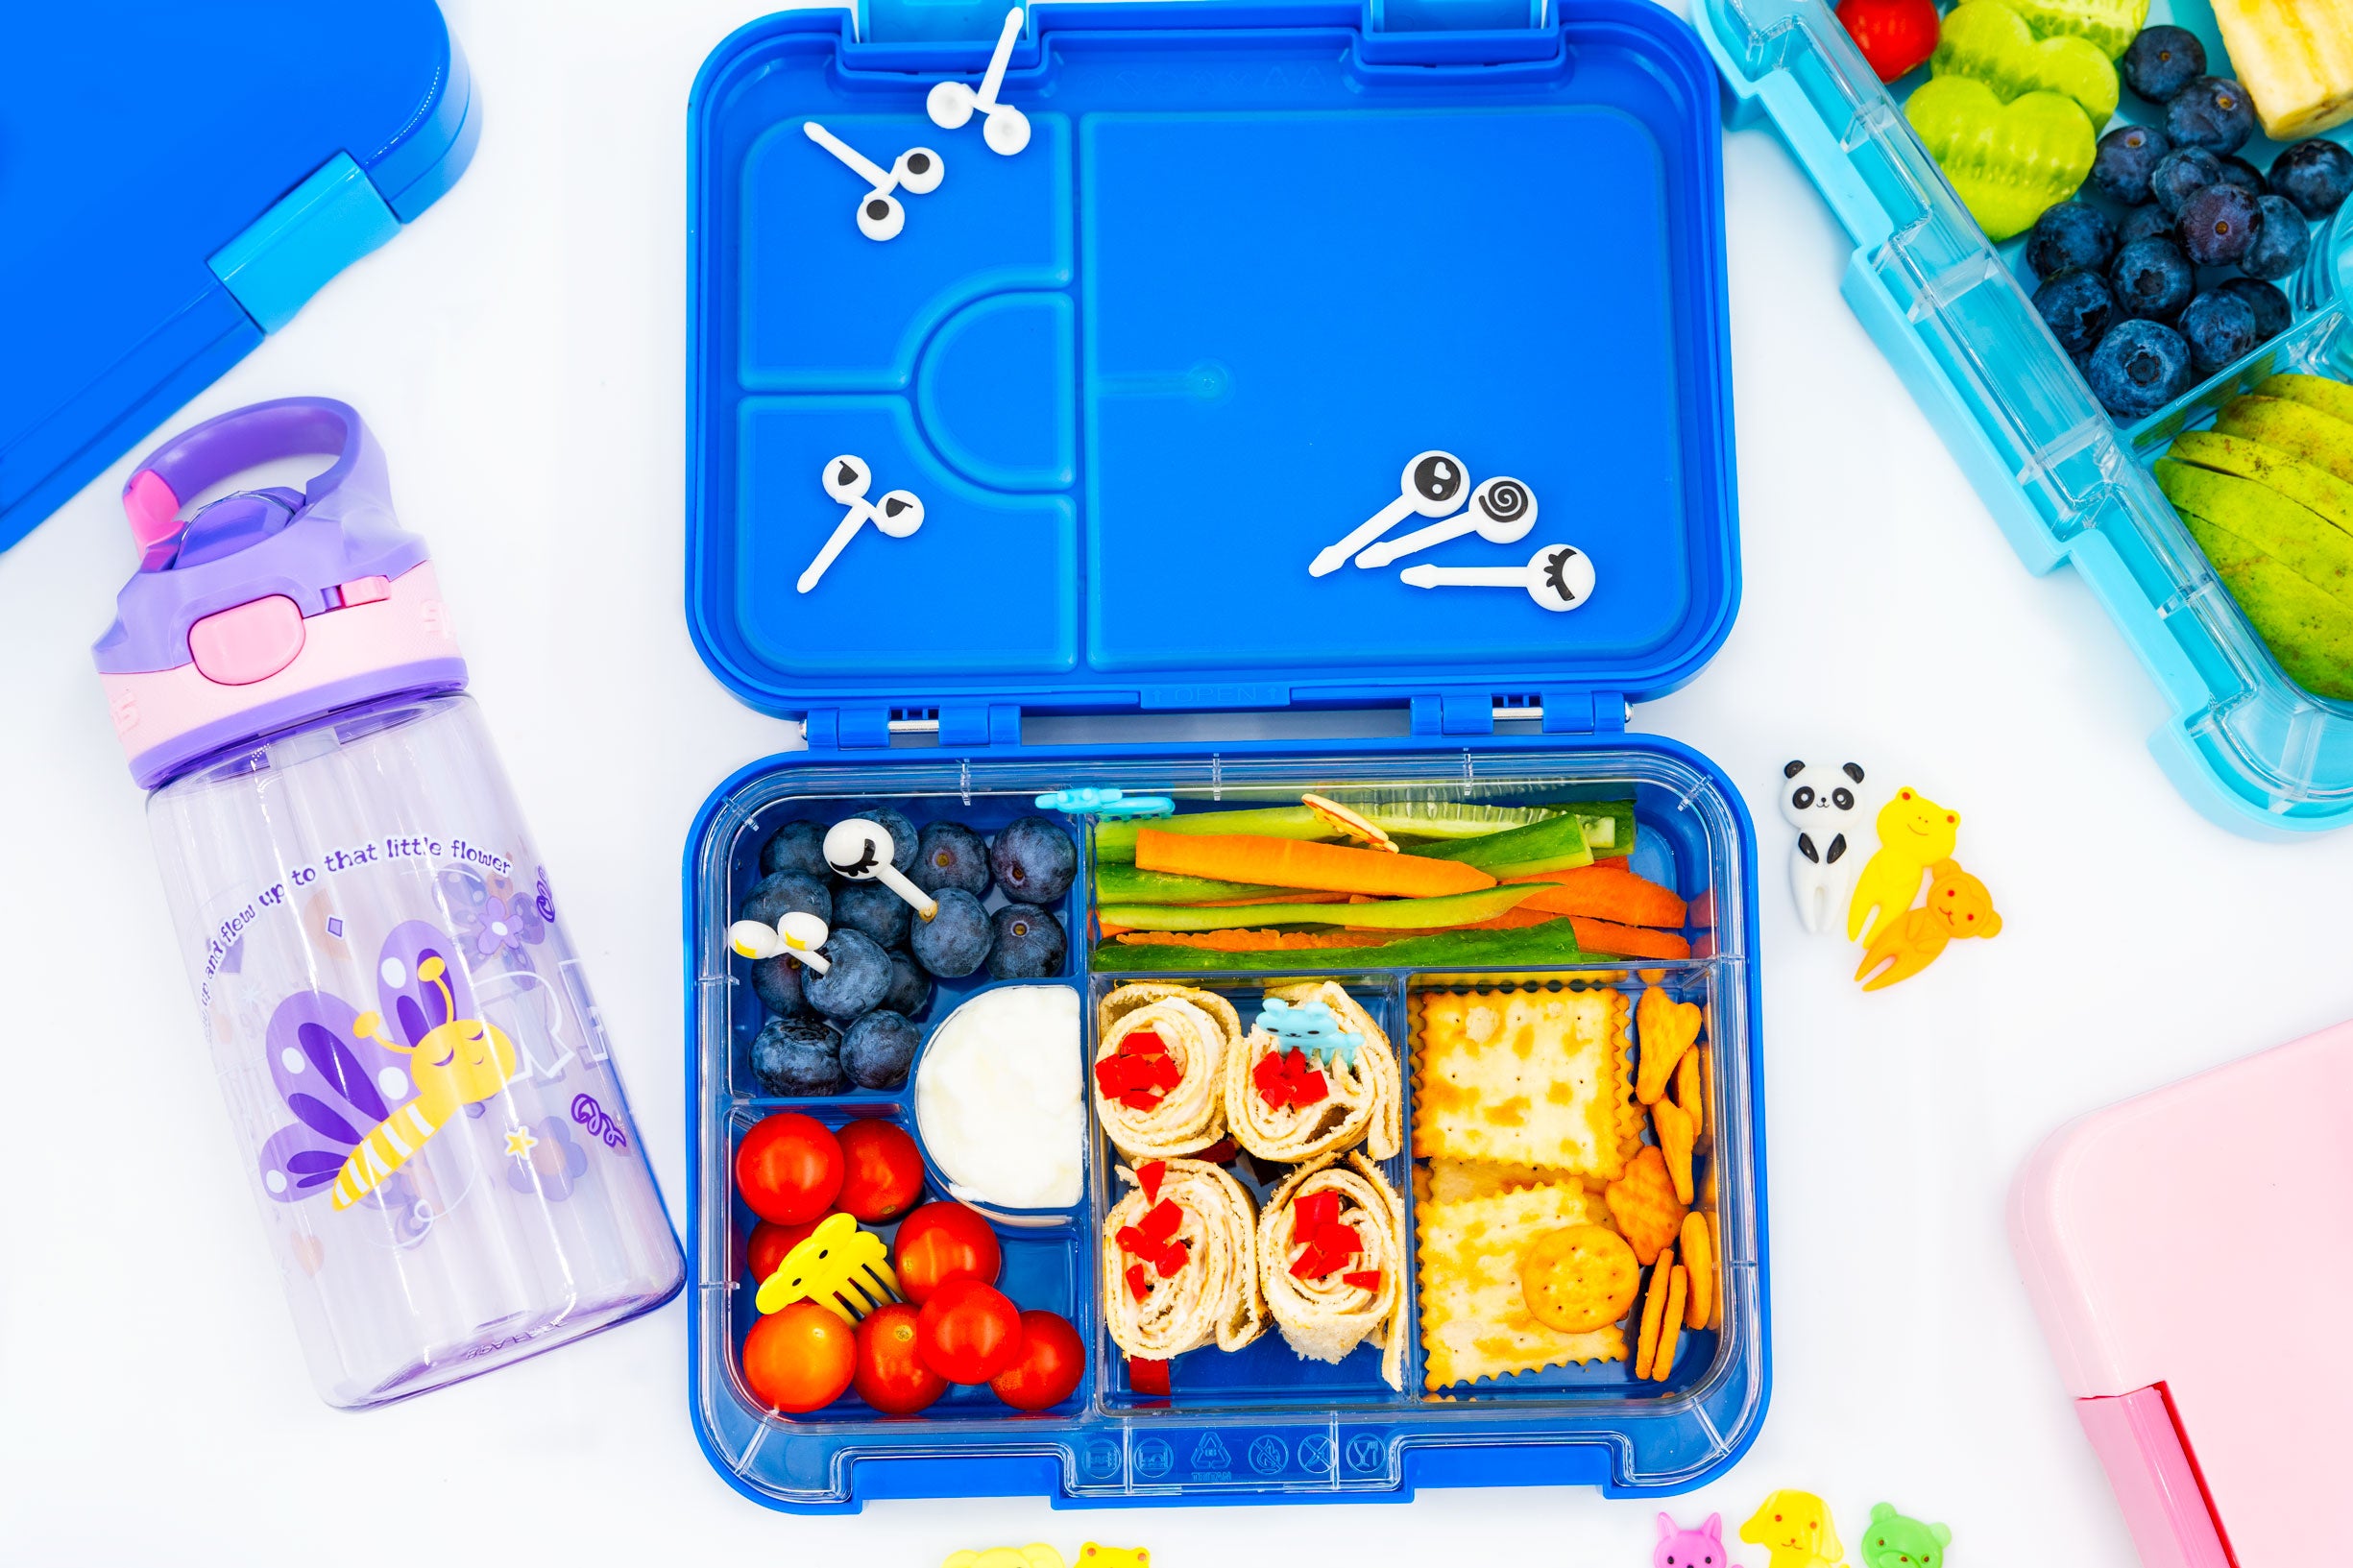 Kids Lunch Box Made in France MB Foodie - Kids Bento Box - Snack Box